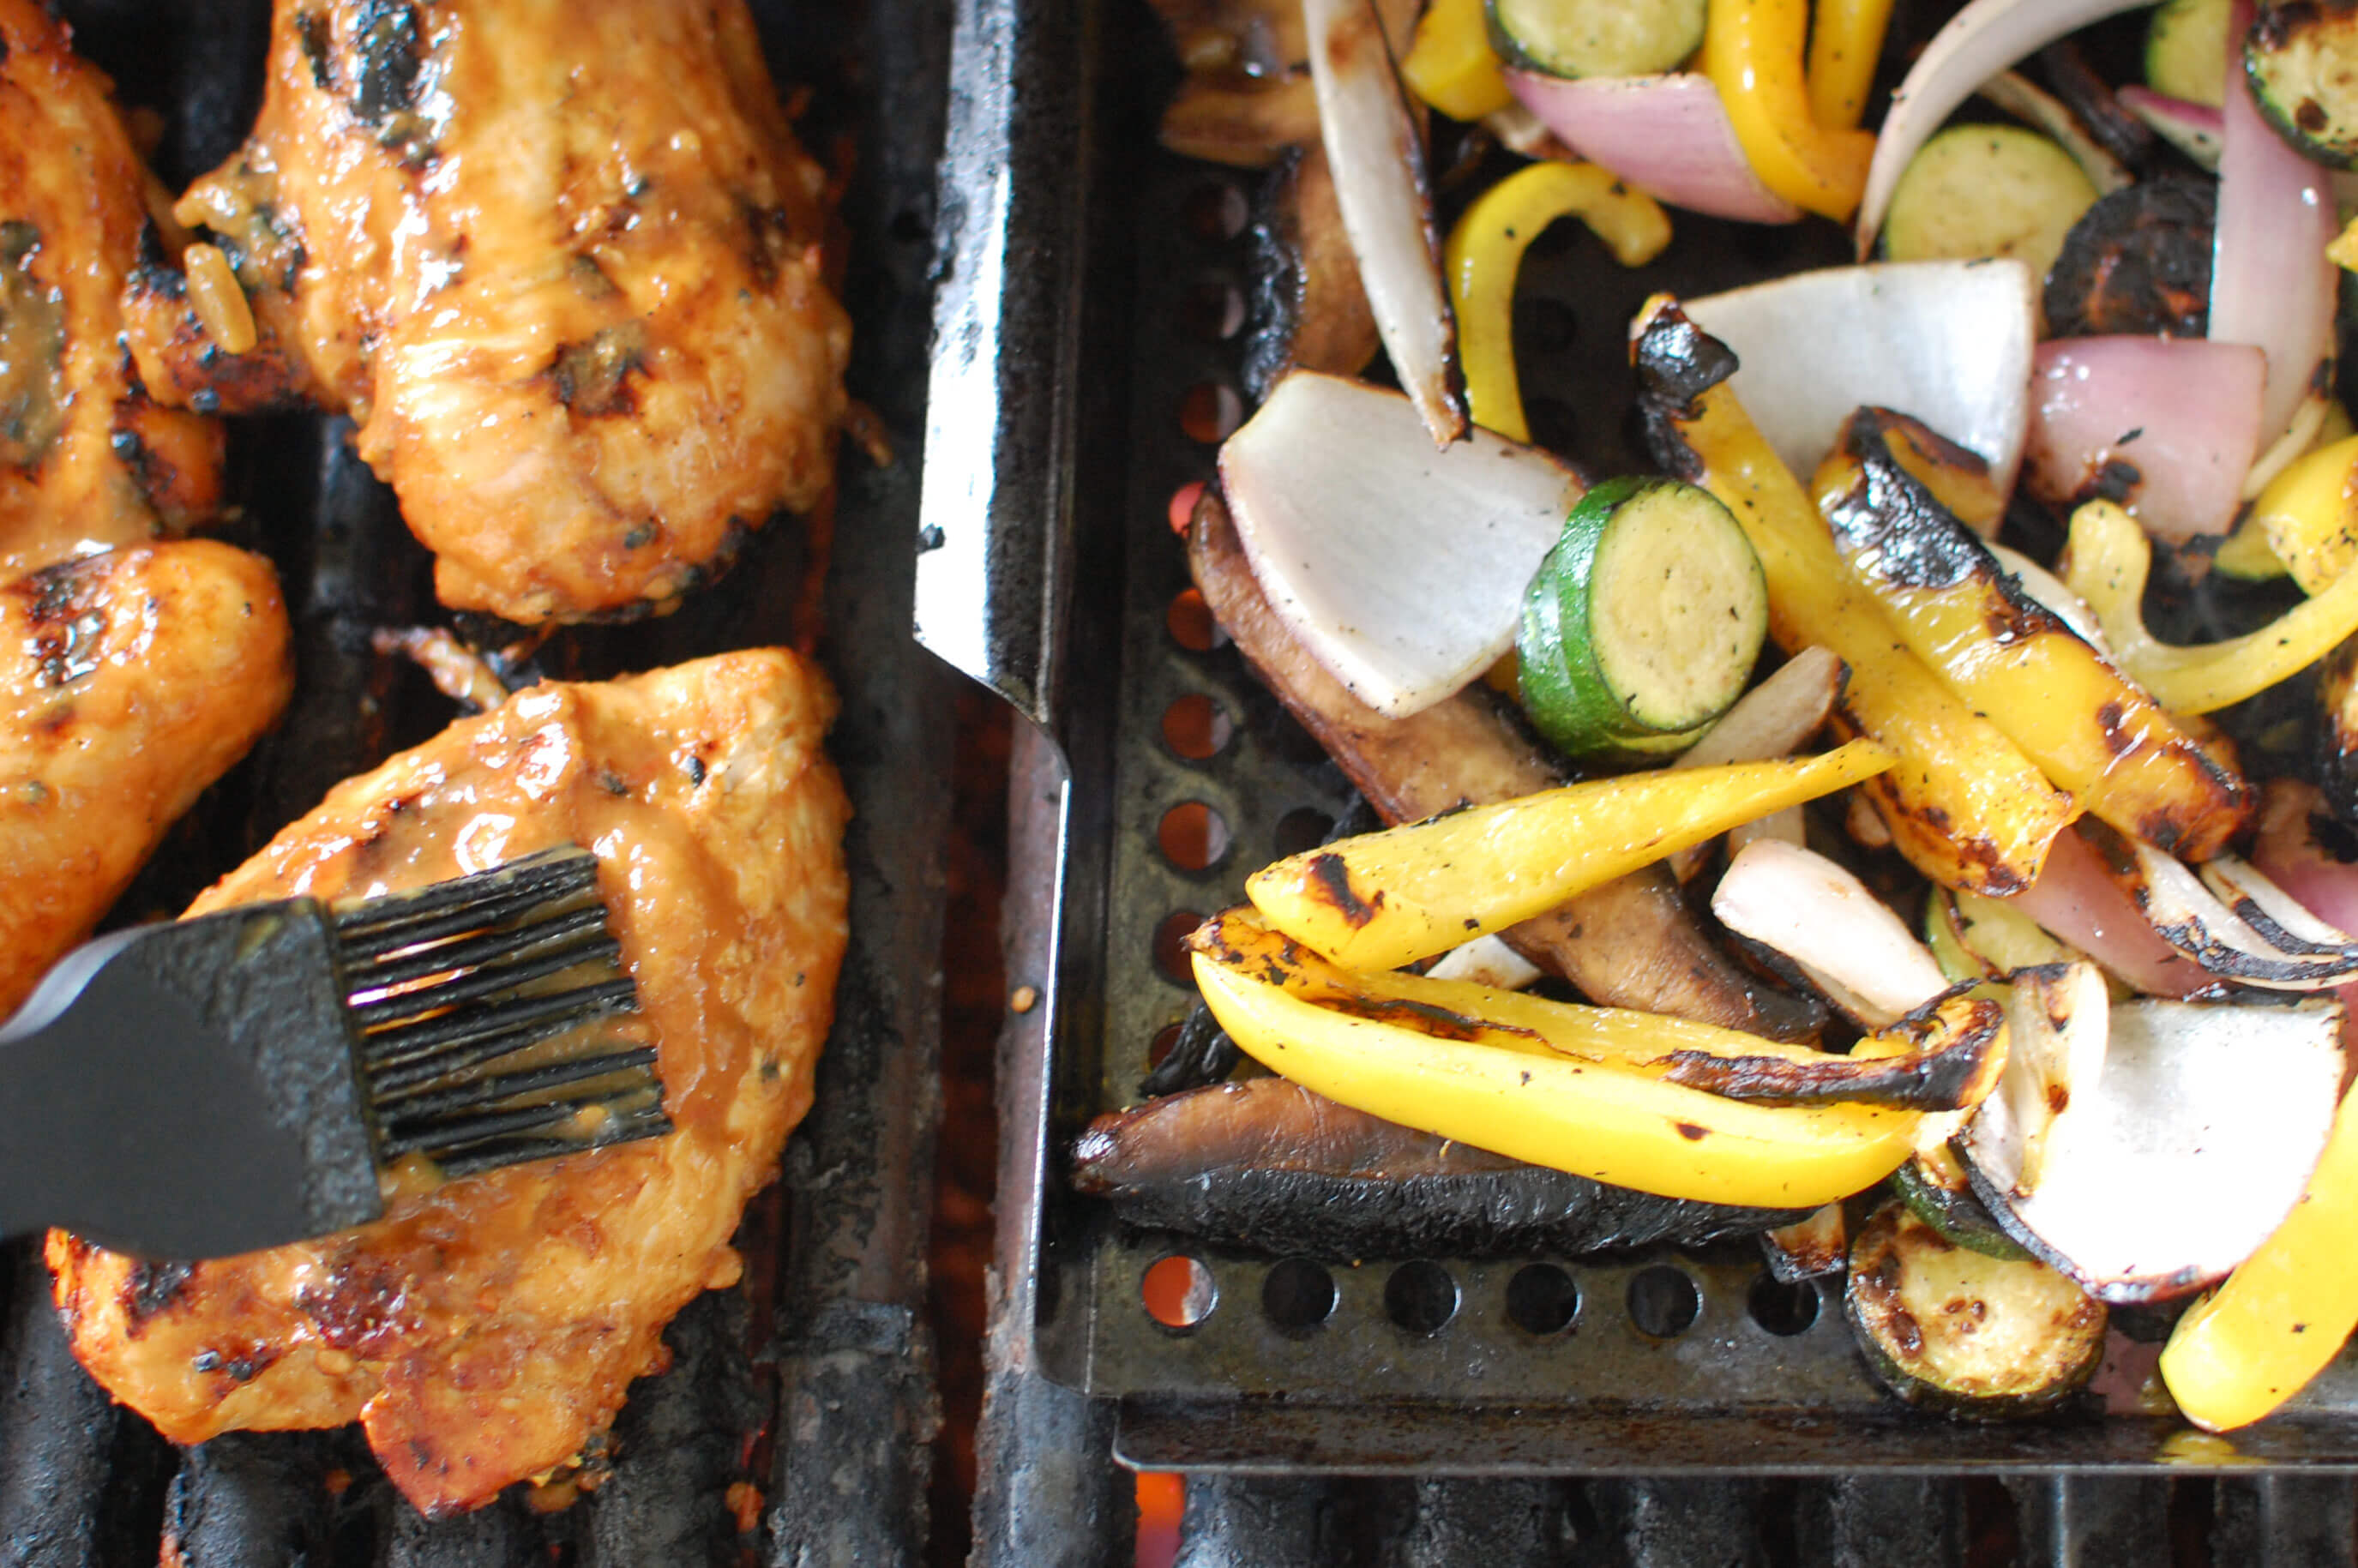 20 Meal Ideas Your Clients Can Grill This Summer: BBQ Chicken with Grilled Balsamic Vegetables